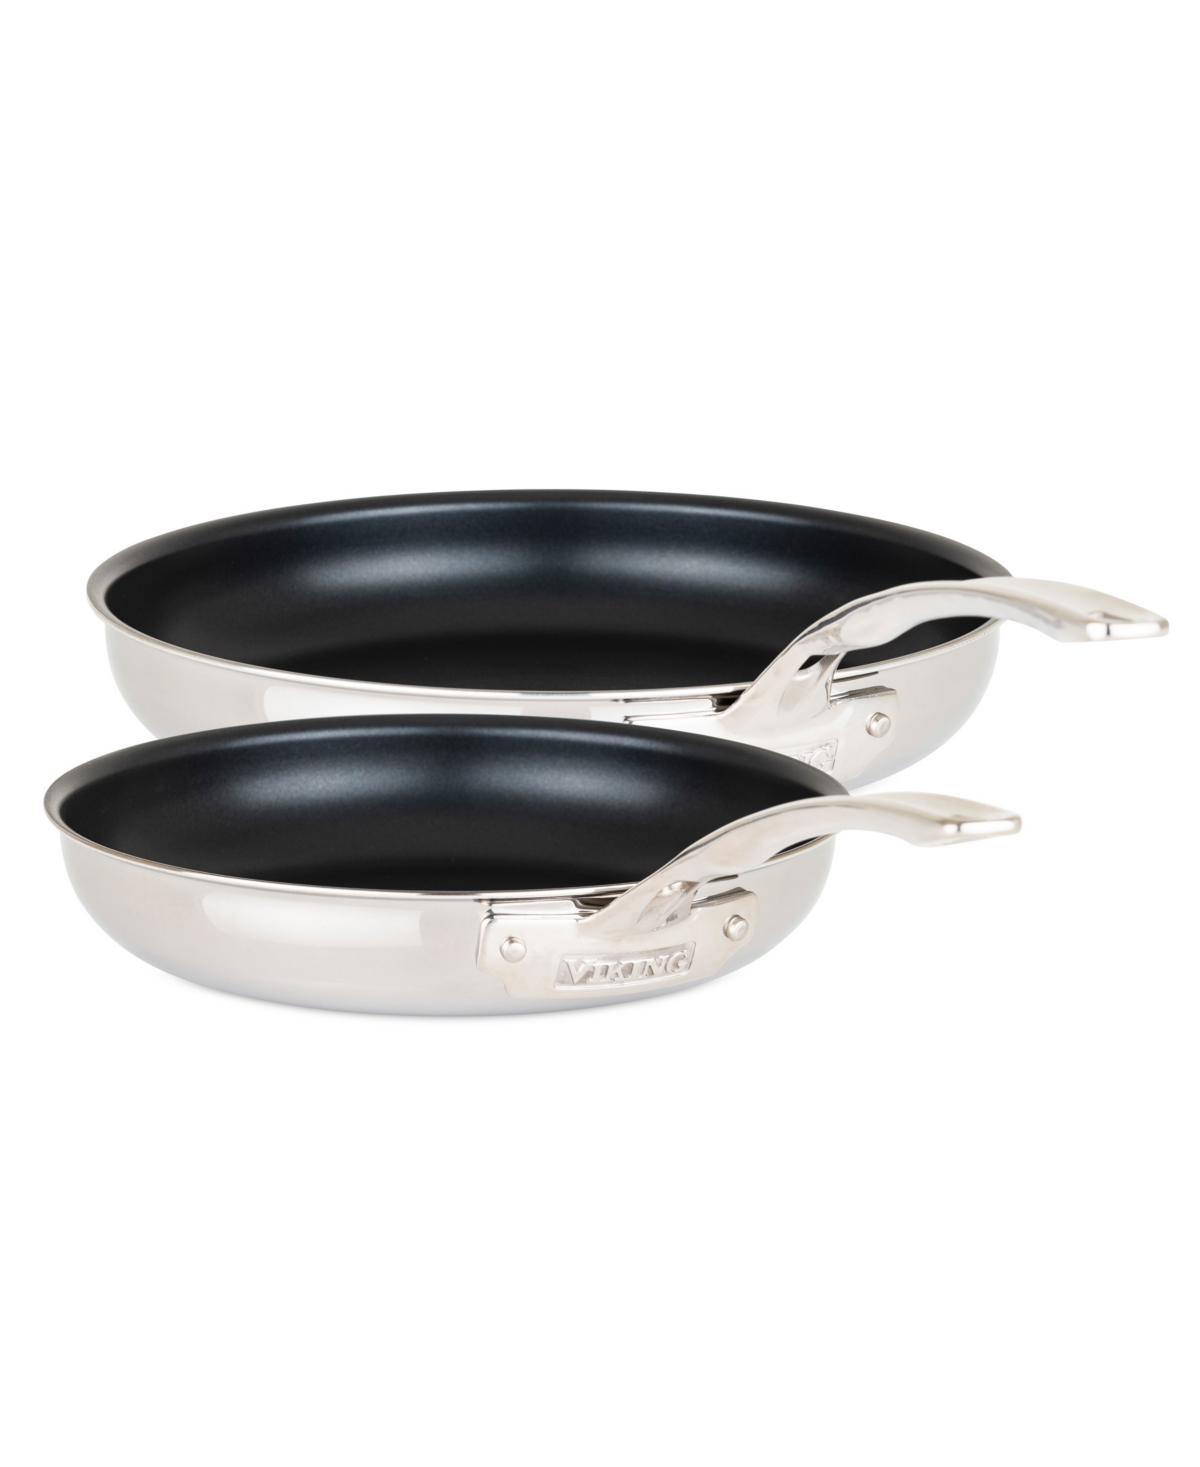 Viking 3-ply Stainless Steel 2-piece Non-stick Fry Pan Set